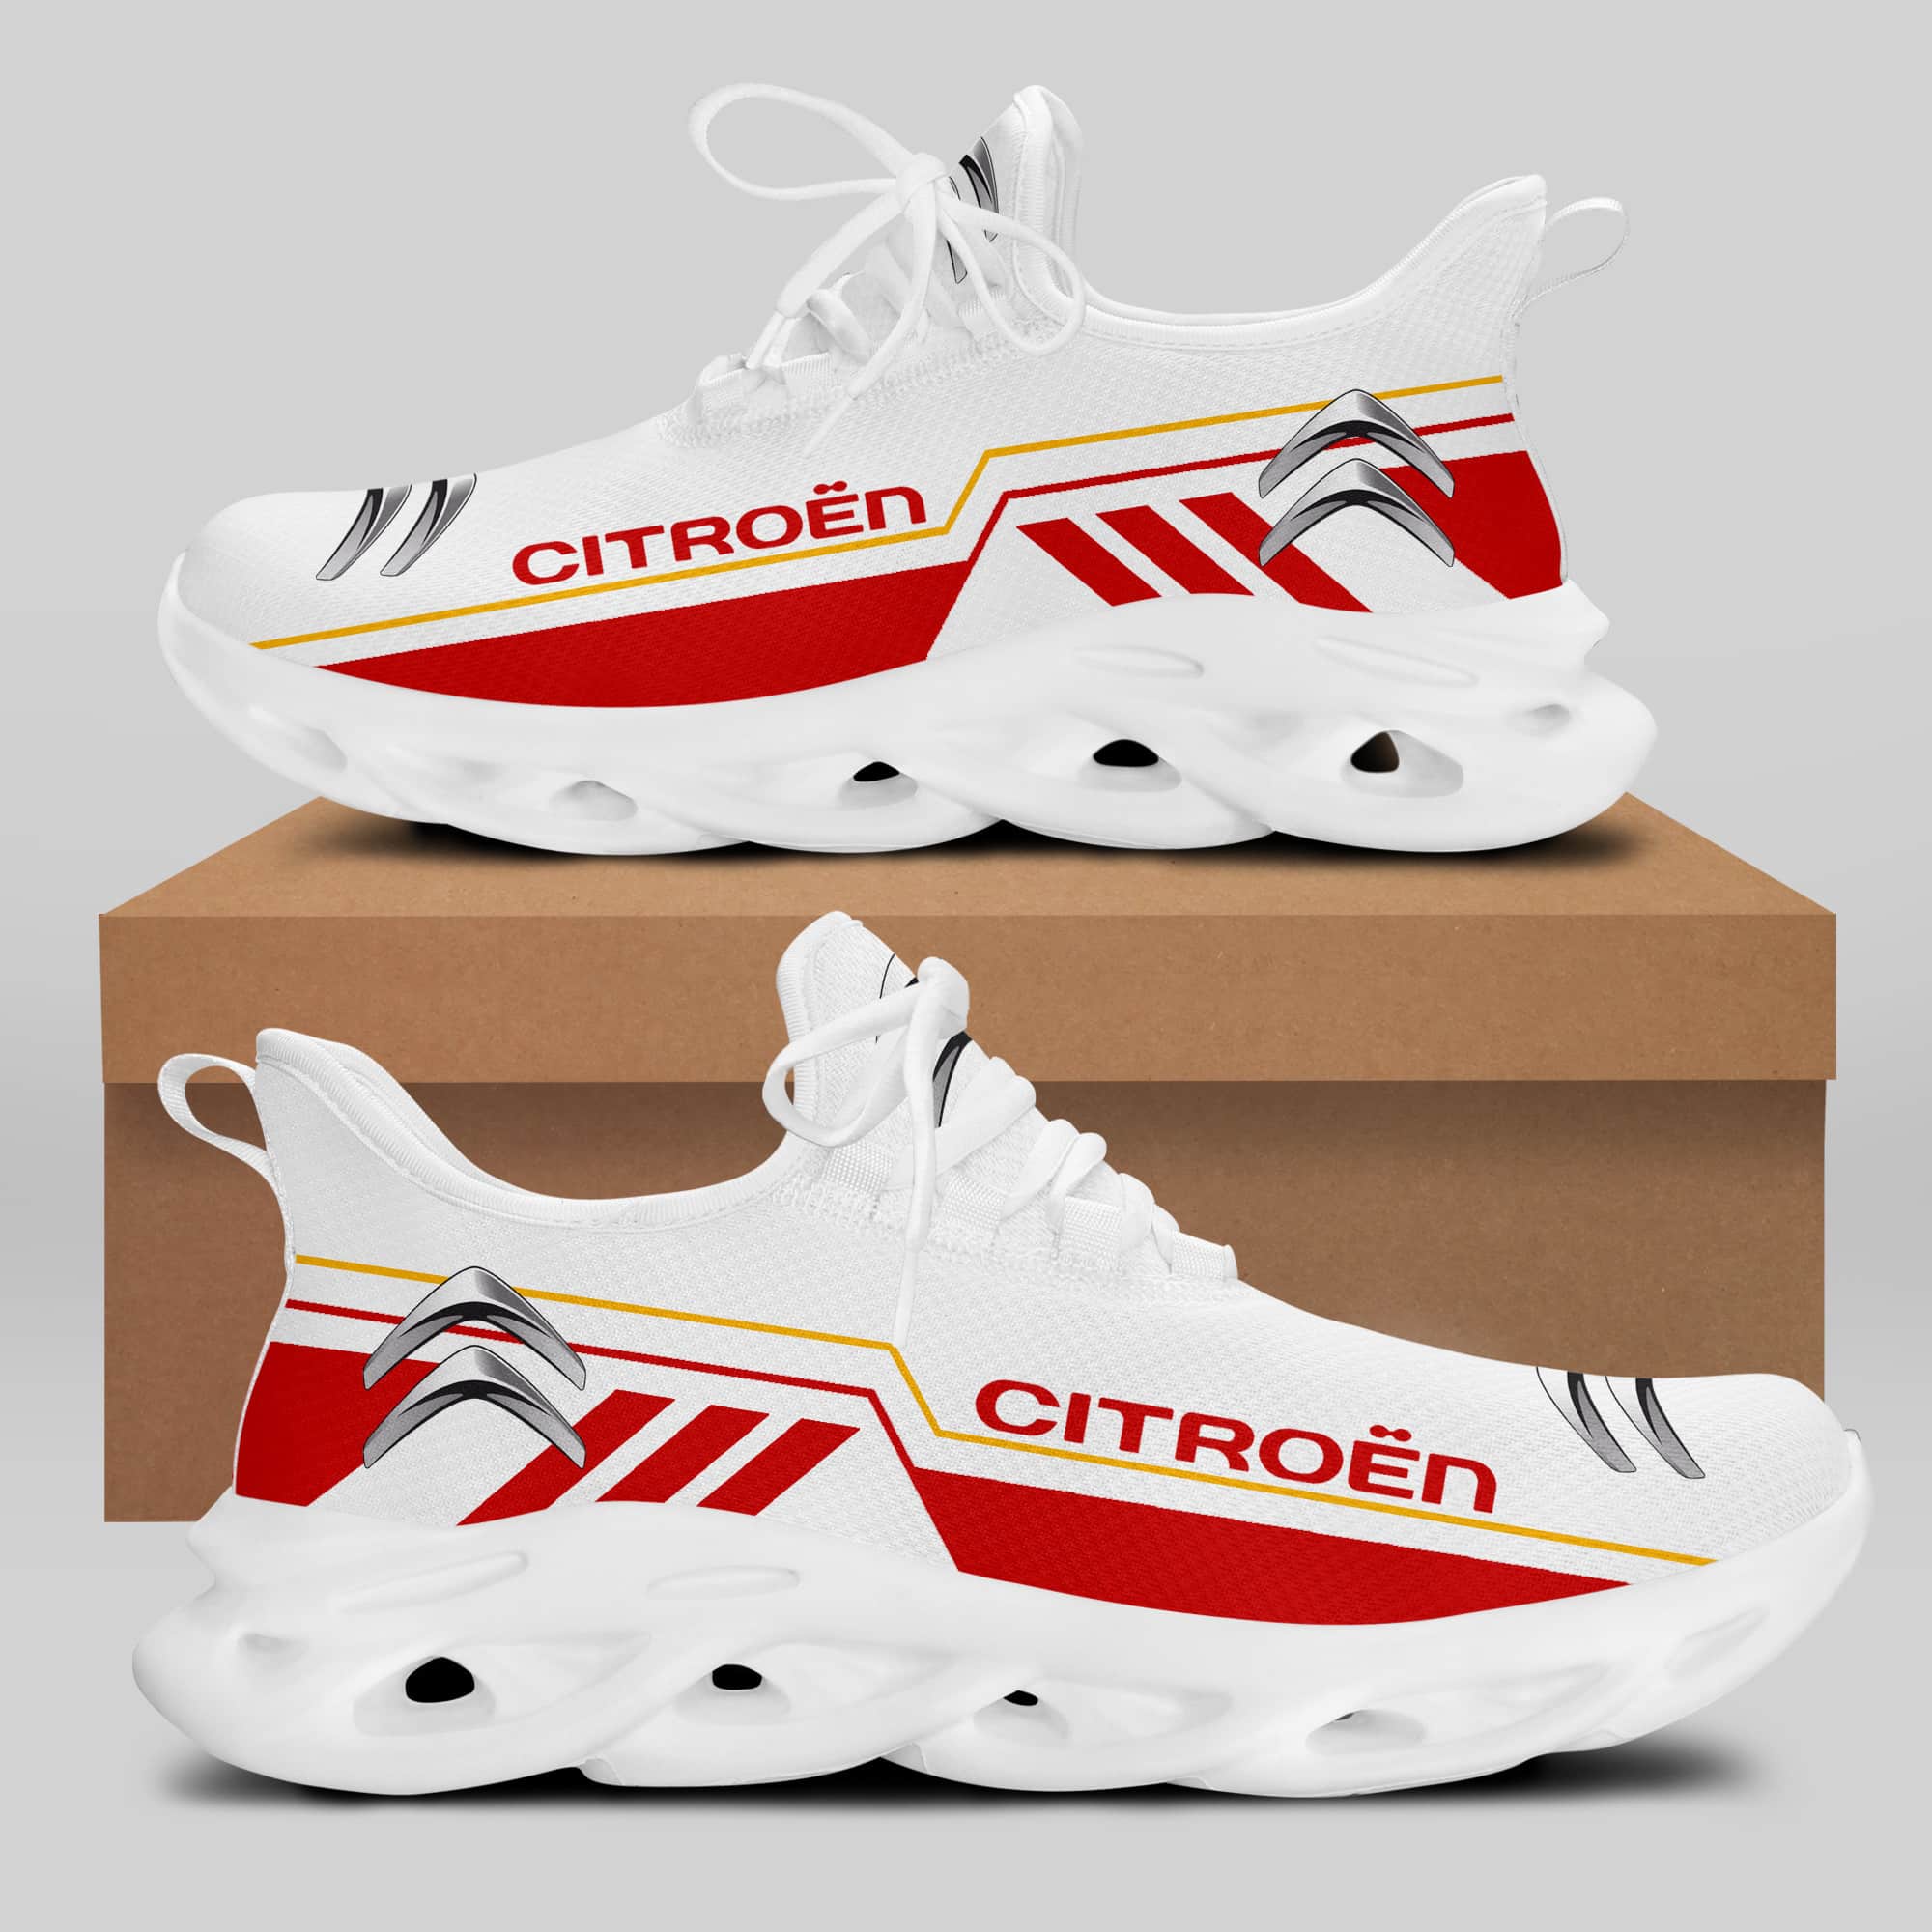 Citroën Running Shoes Max Soul Shoes Sneakers Ver 23 1